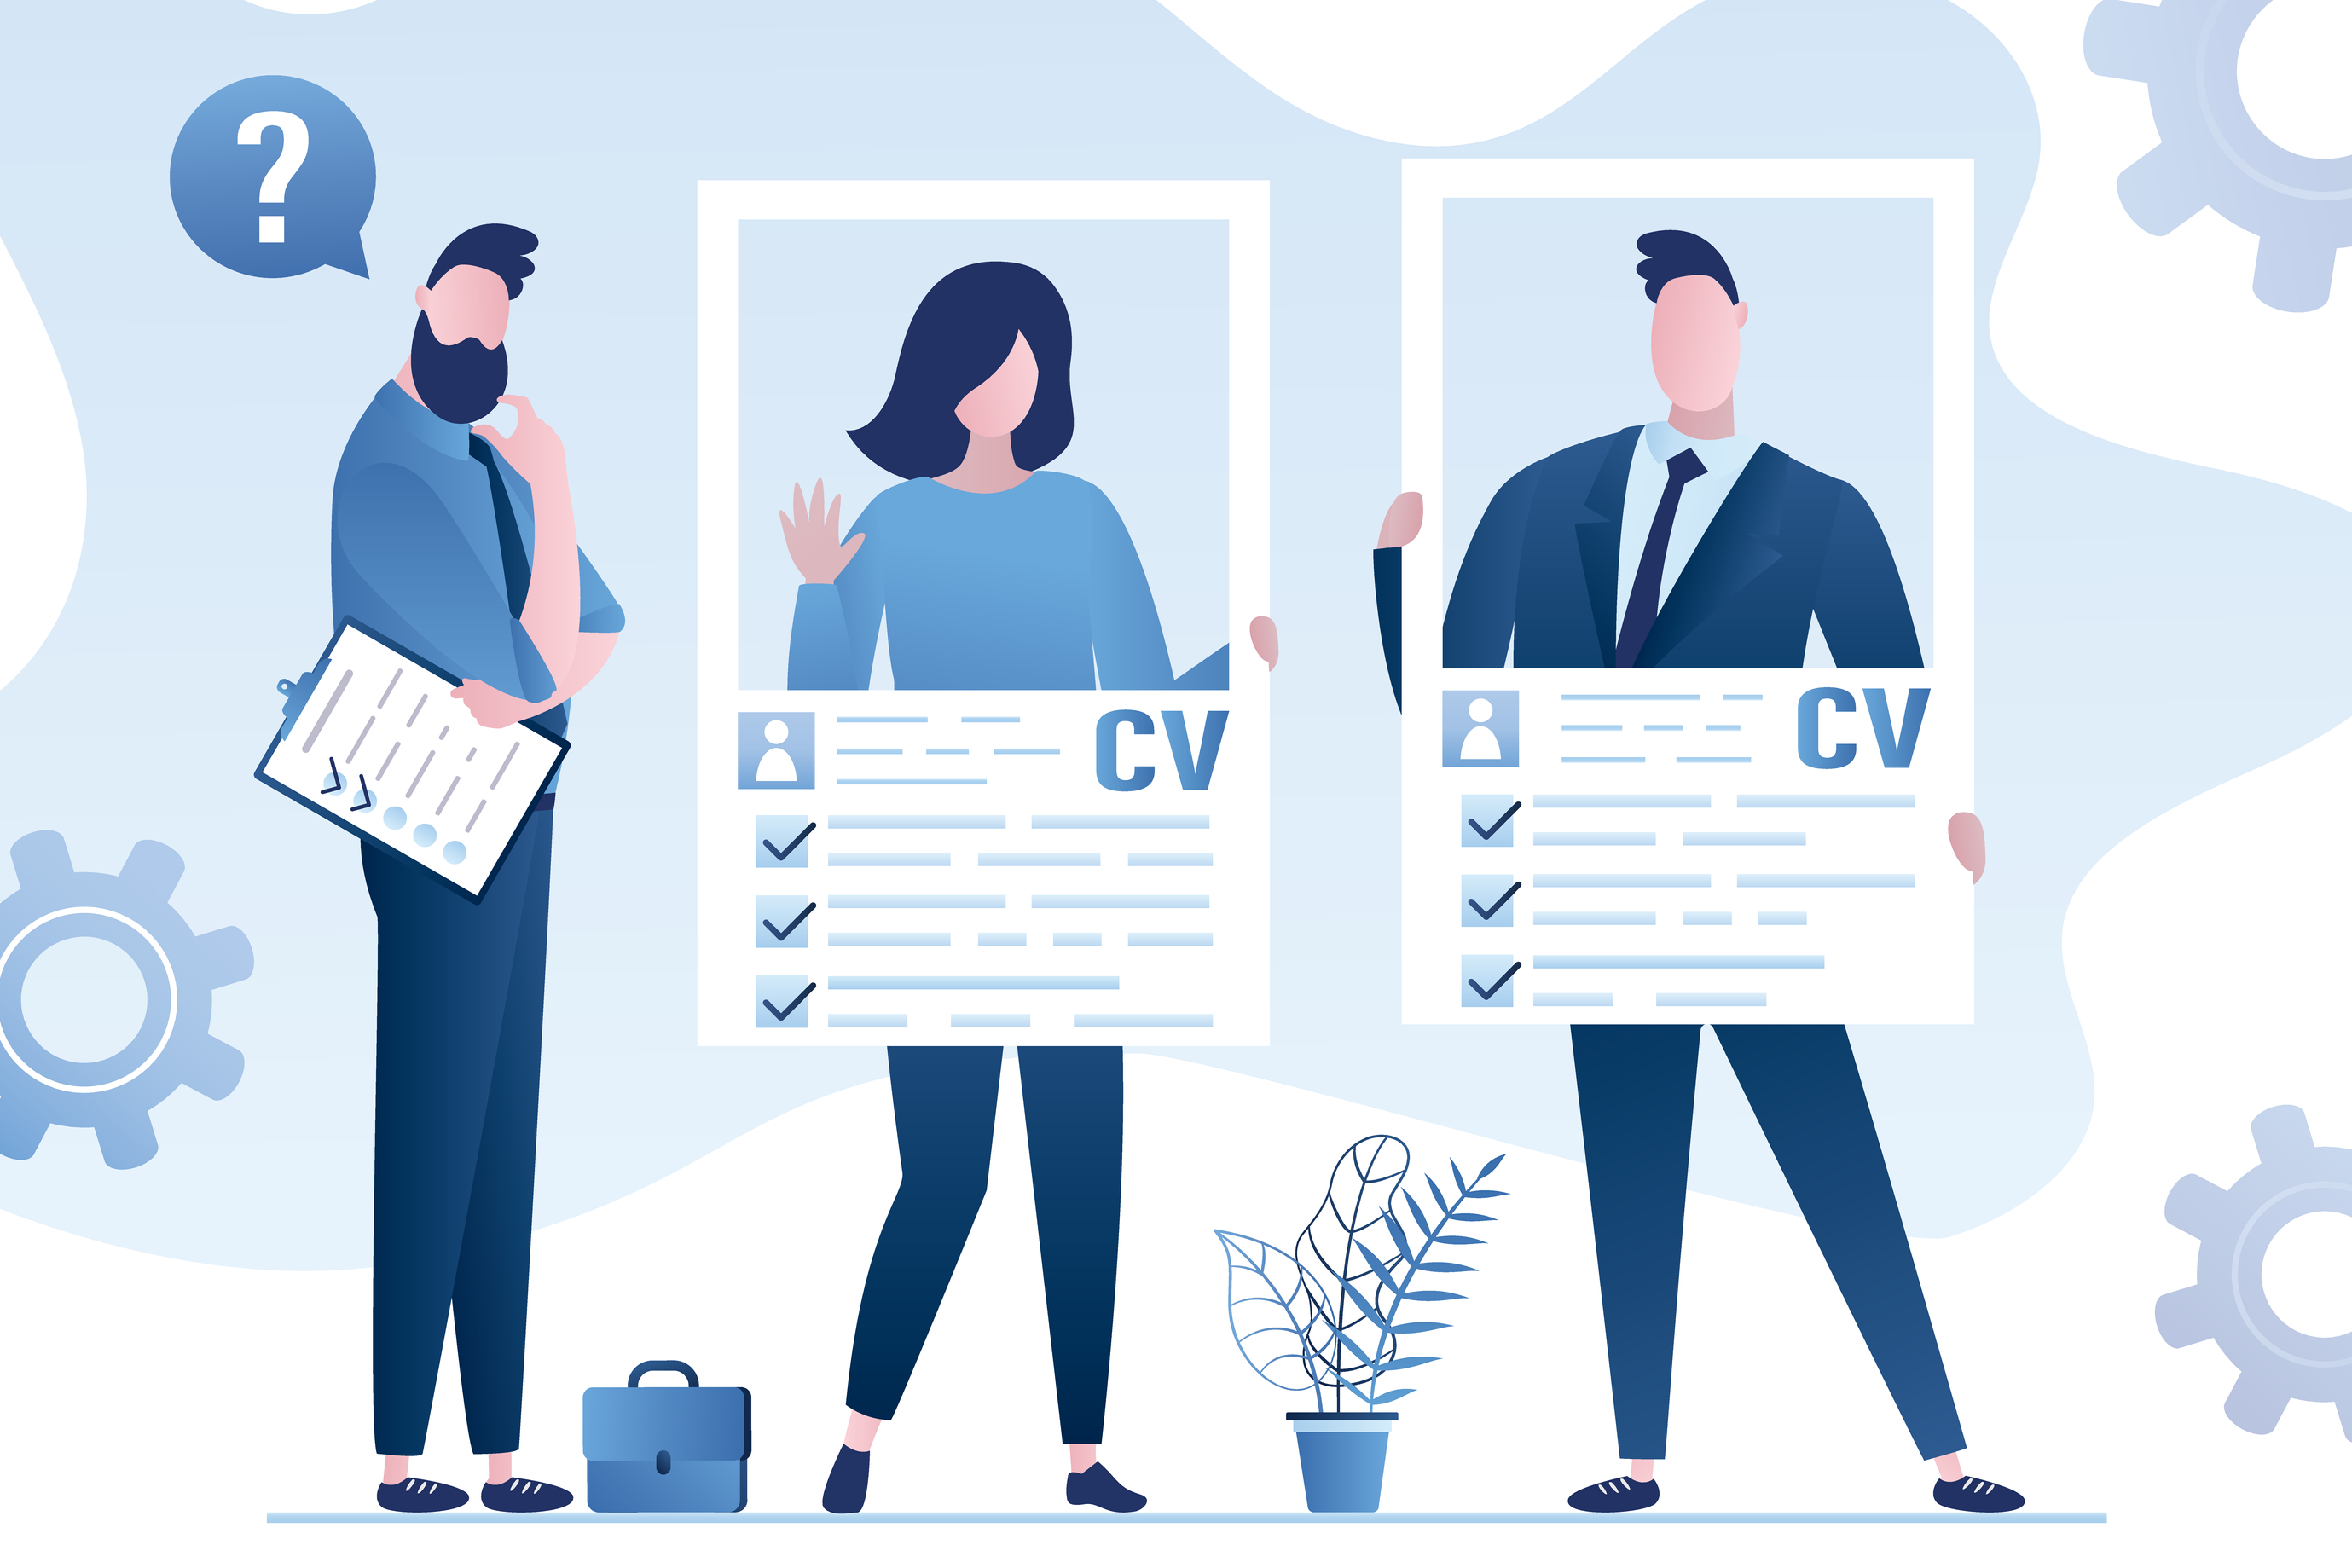 Highlight your skills and experience to stand your CV out among many other ones